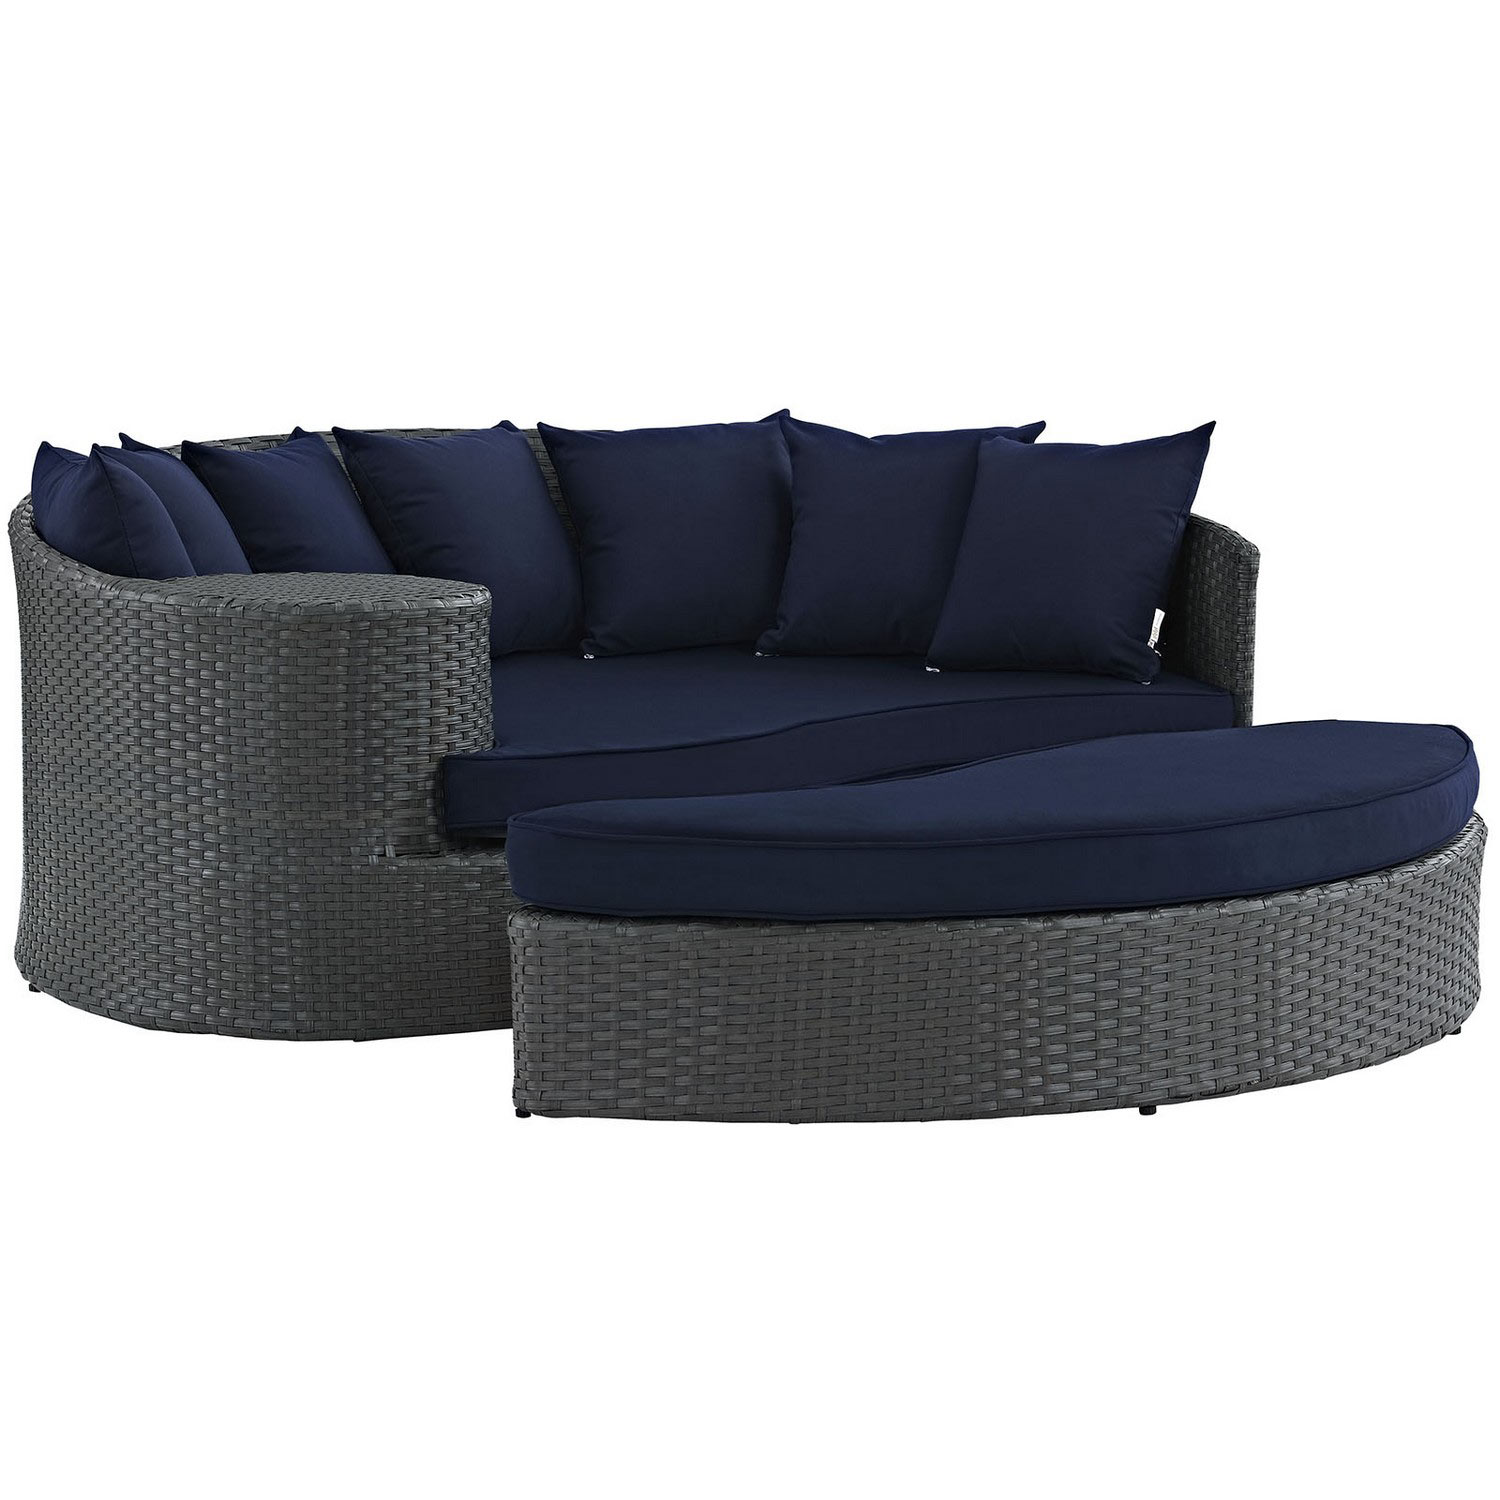 Modway Sojourn Outdoor Patio Sunbrella Daybed - Canvas Navy